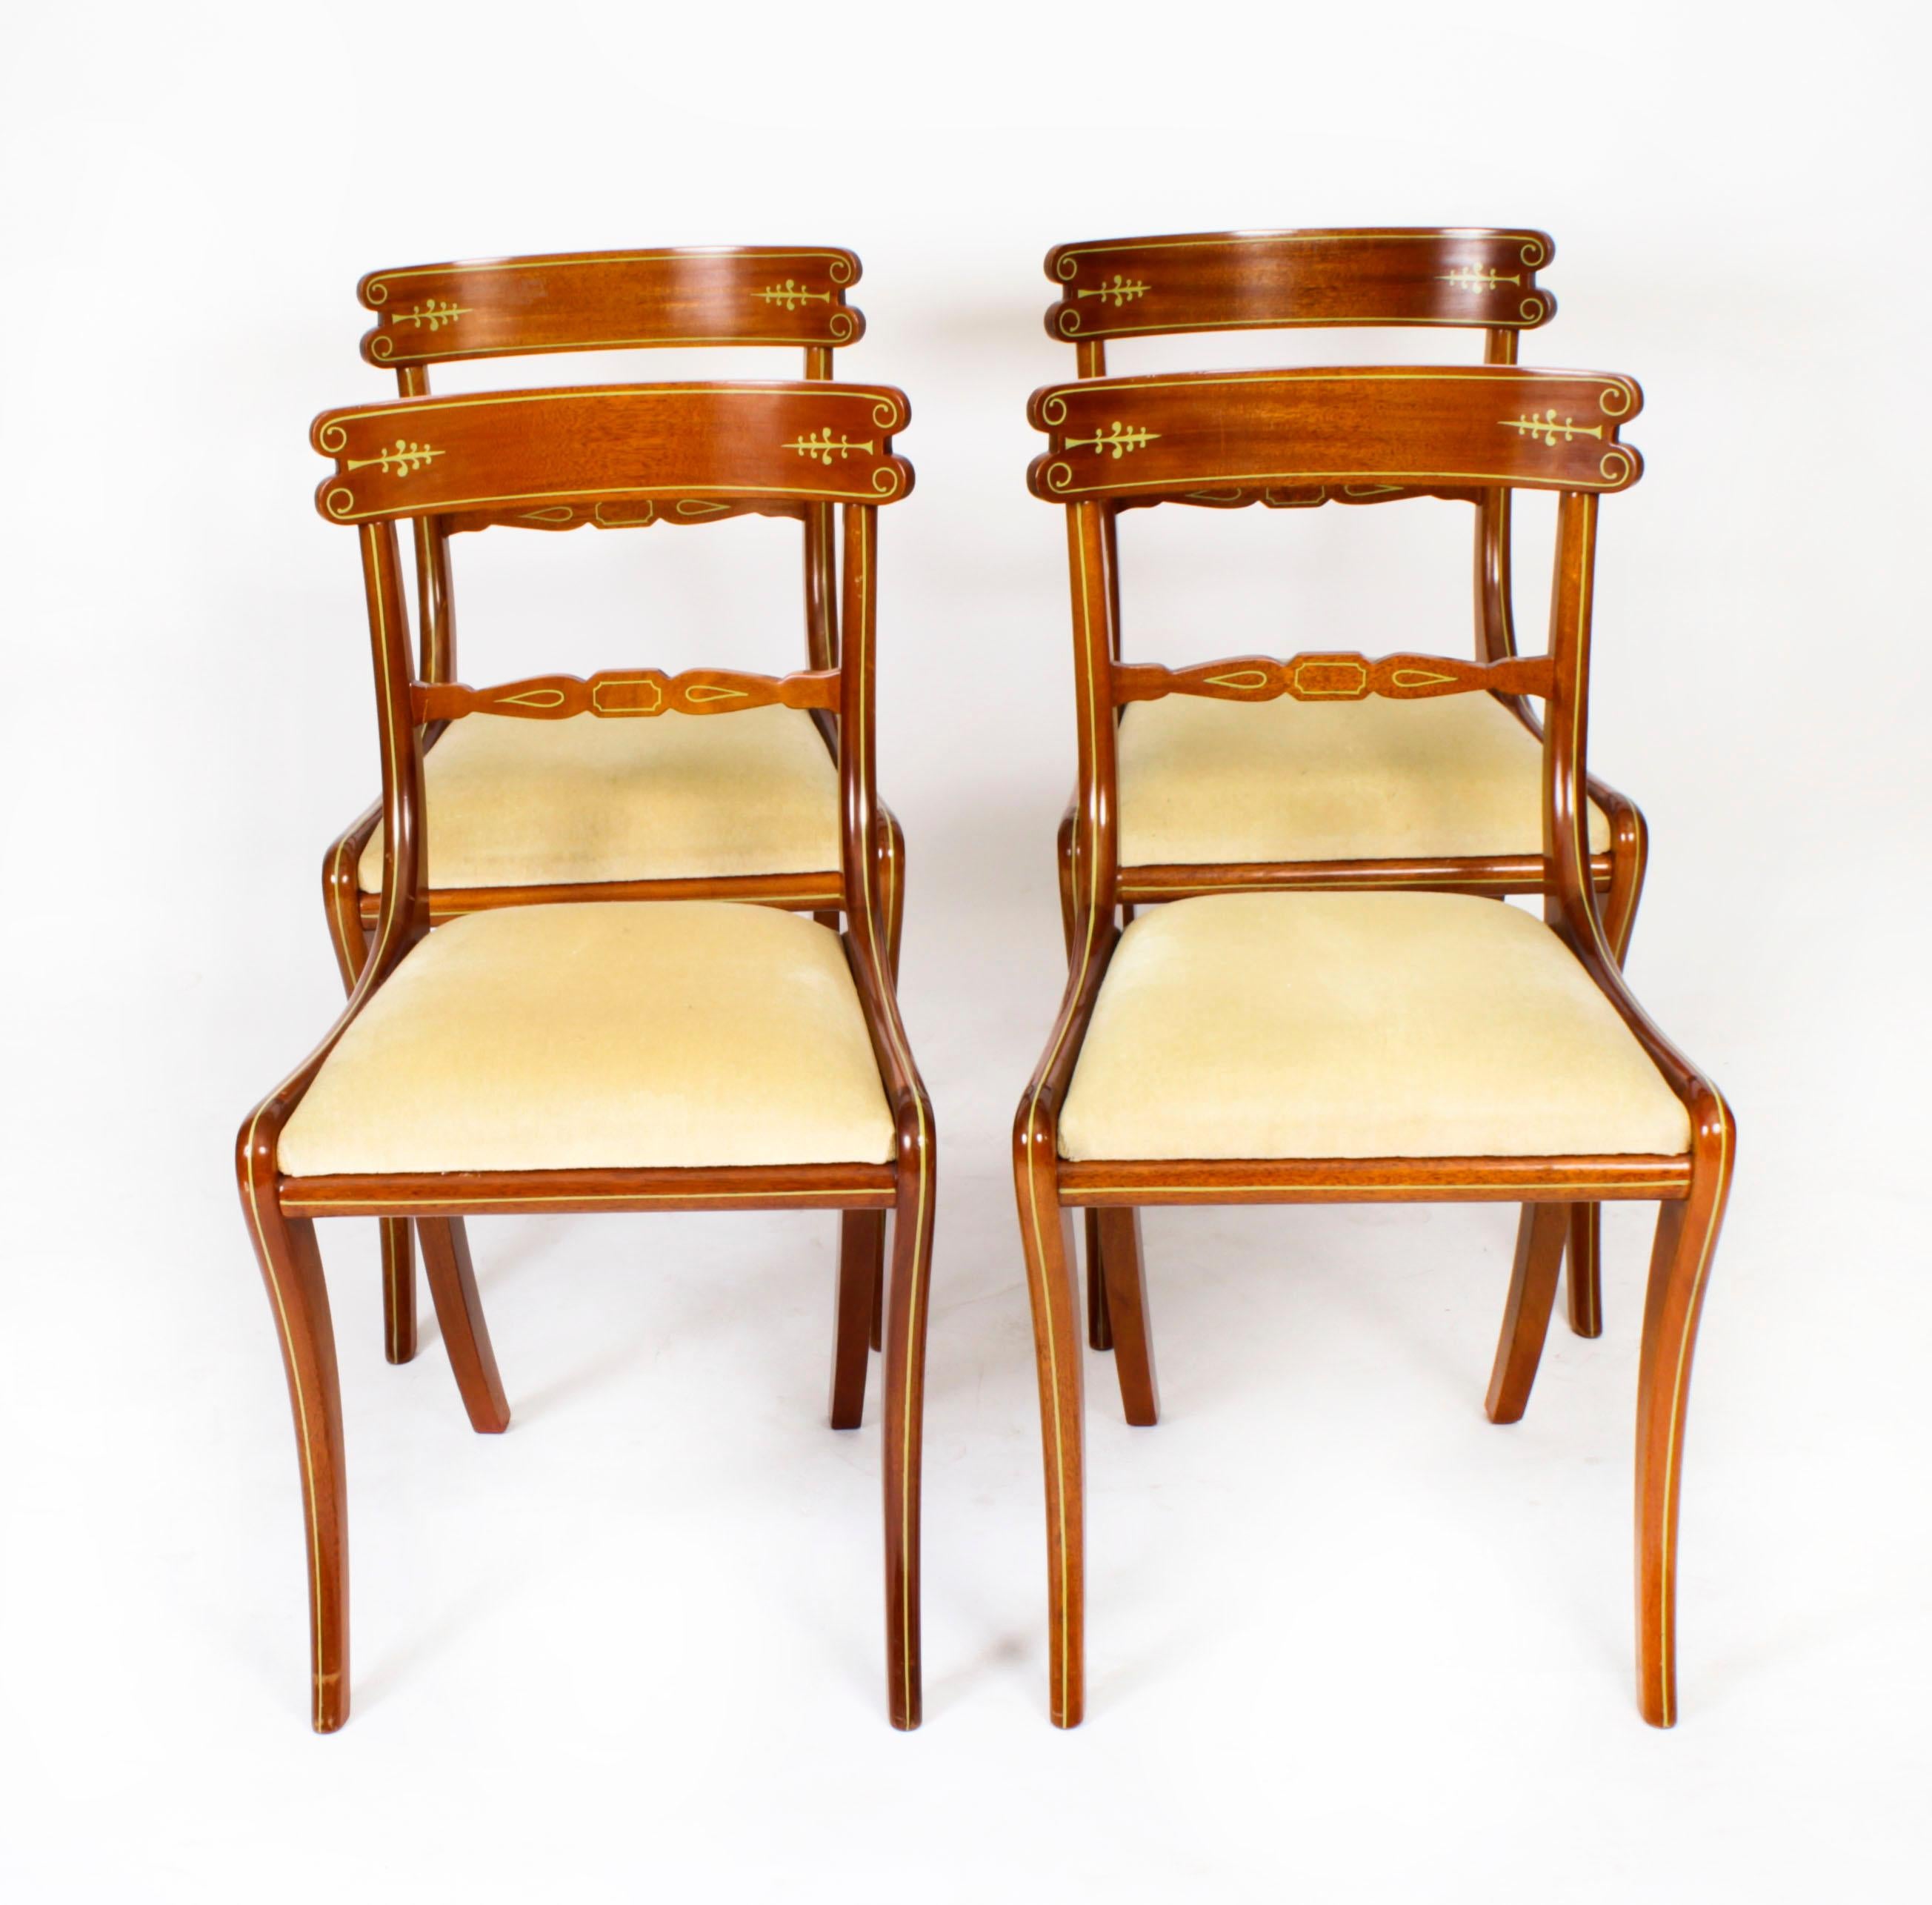 This is a fabulous Vintage set of four Regency Revival dining chairs by William Tillman, Circa 1980 in date.

Purchased at great expense from the master cabinet maker William Tillman, Crouch Lane, Borough Green Kent in the 1980s.

The set